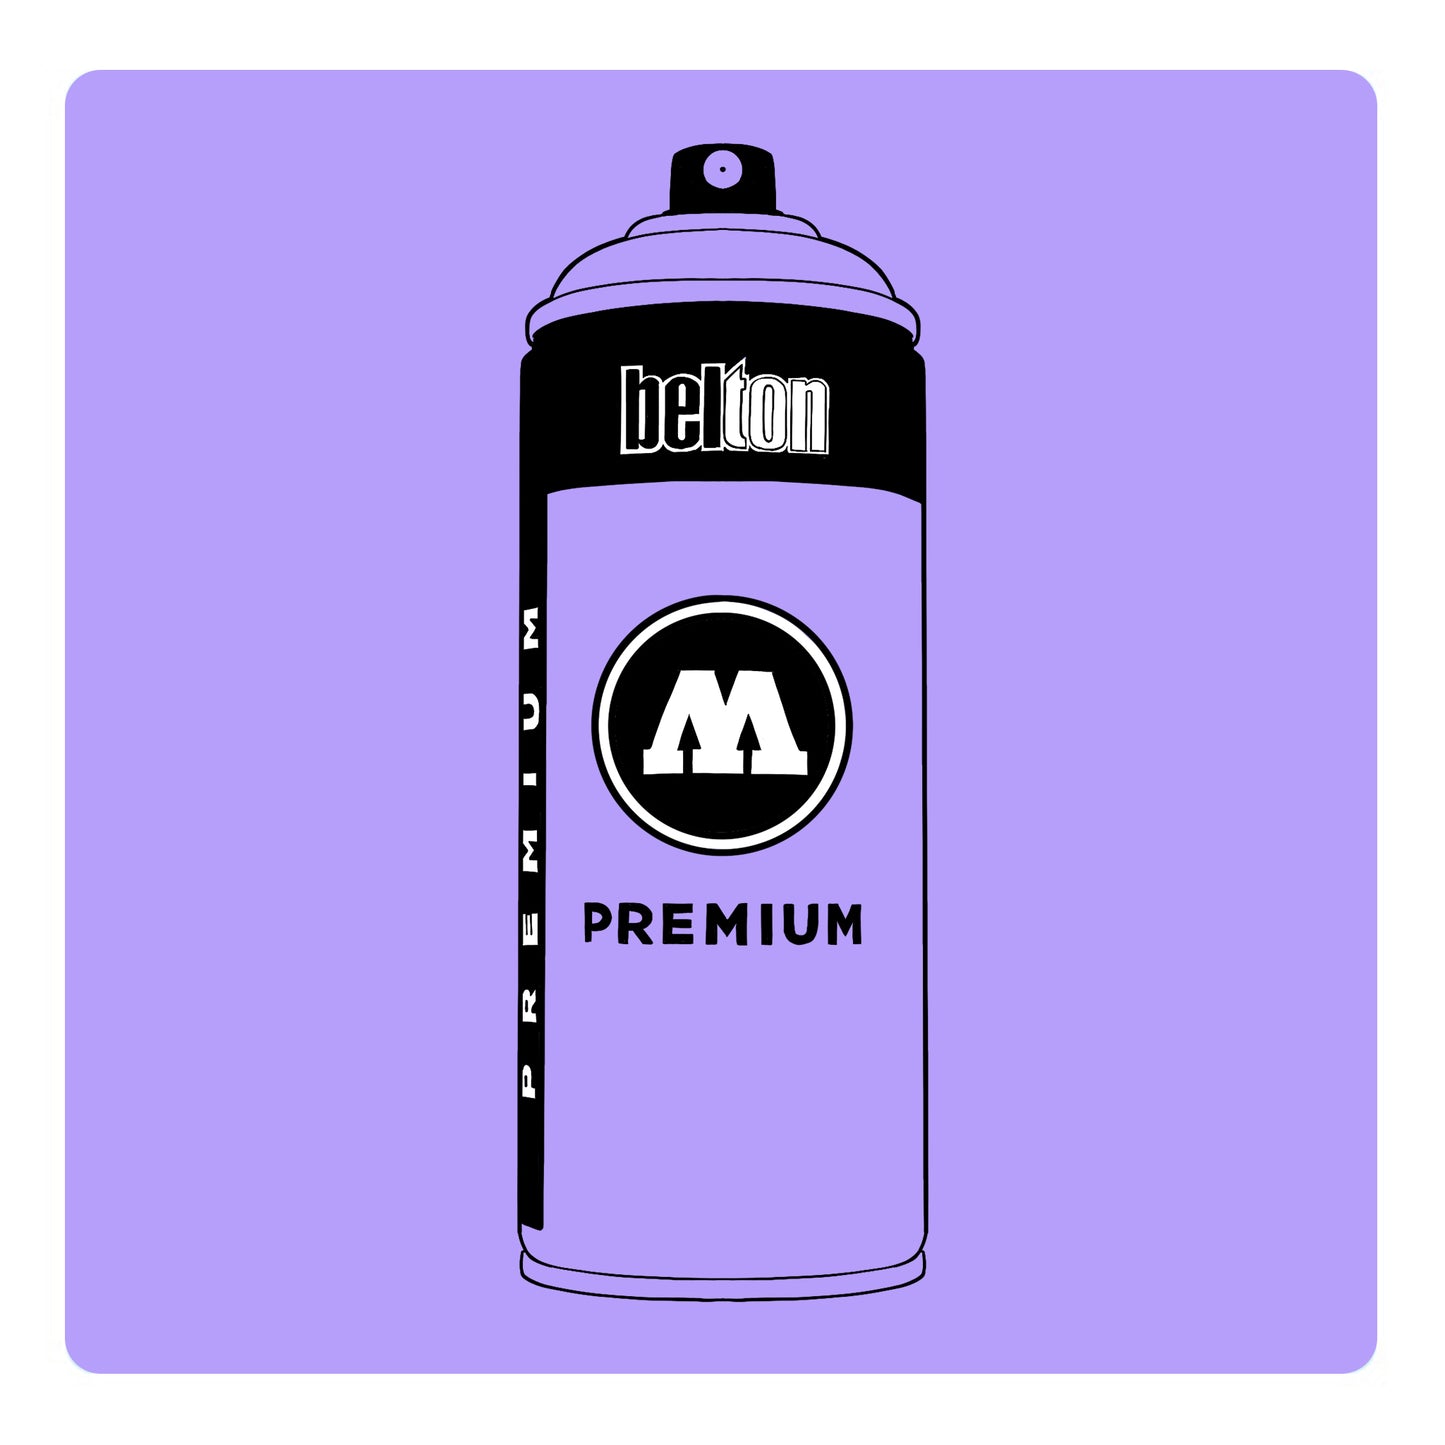 A black outline drawing of a iris purple spray paint can with the words "belton","premium" and the letter"M" written on the face in black and white font. The background is a color swatch of the same iris purple with a white border.